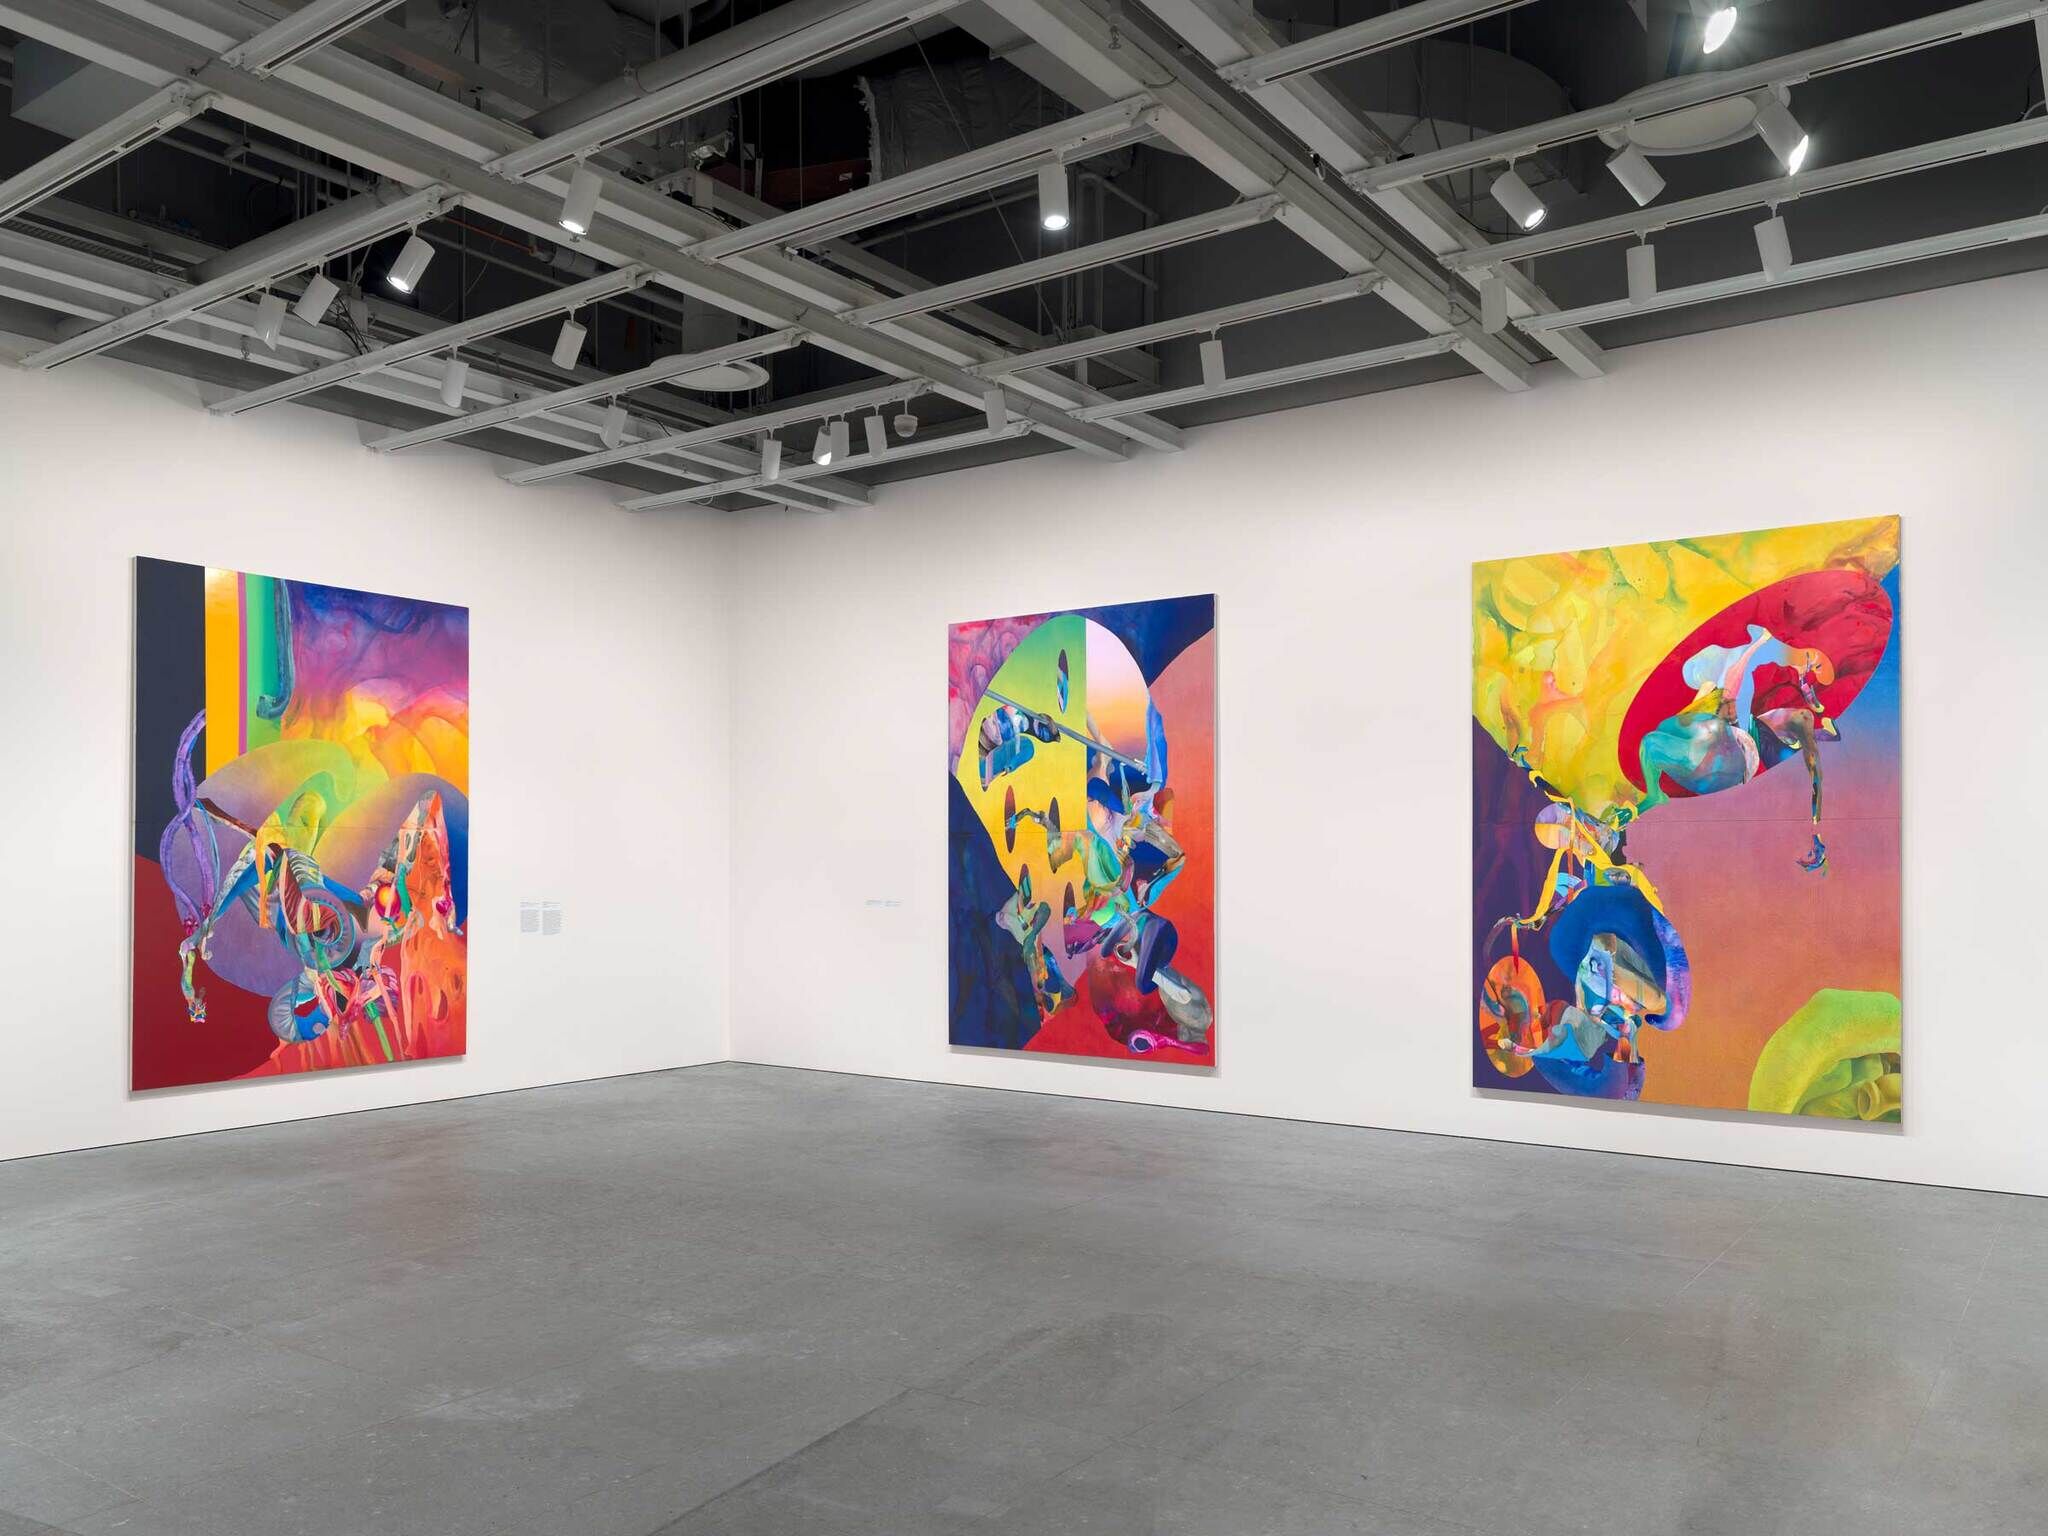 On the left wall, a big, vivid, and abstract painting, on the right wall, two of the big, vivid abstract paintings with different shapes and colors.